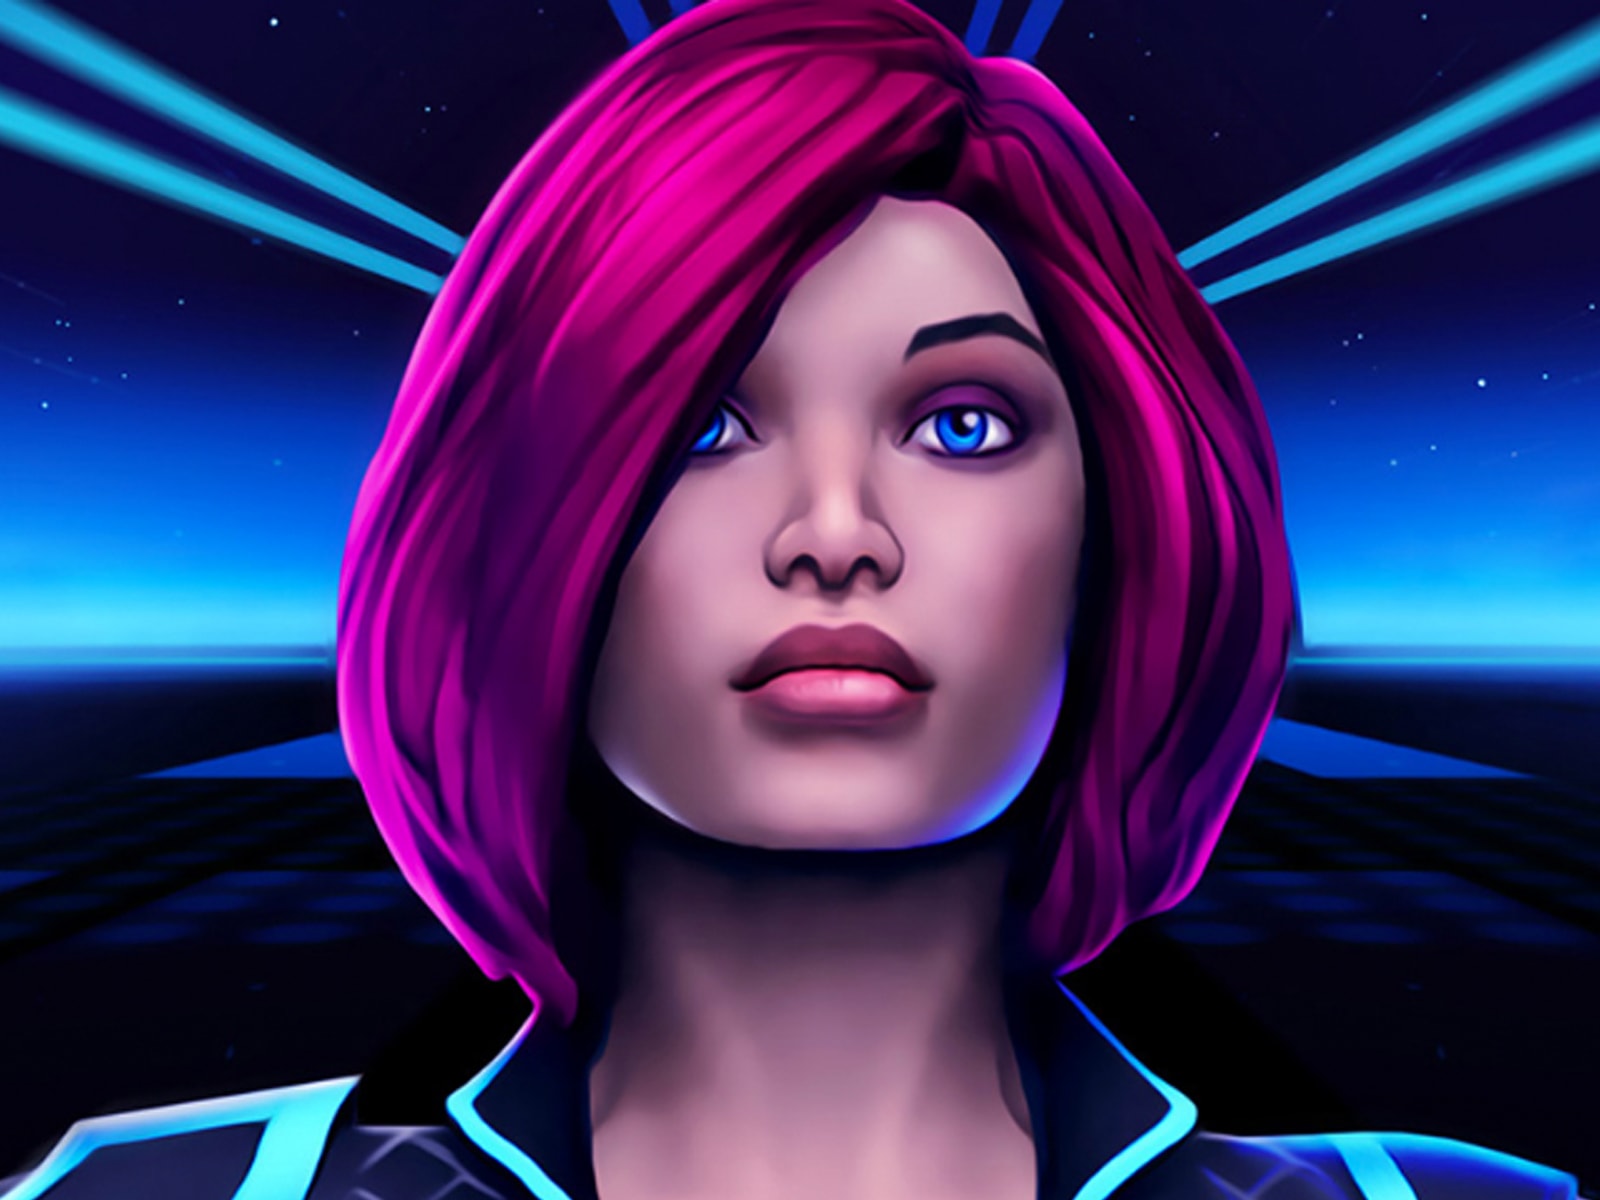 Screenshot from GrooVR featuring a pink-haired female character